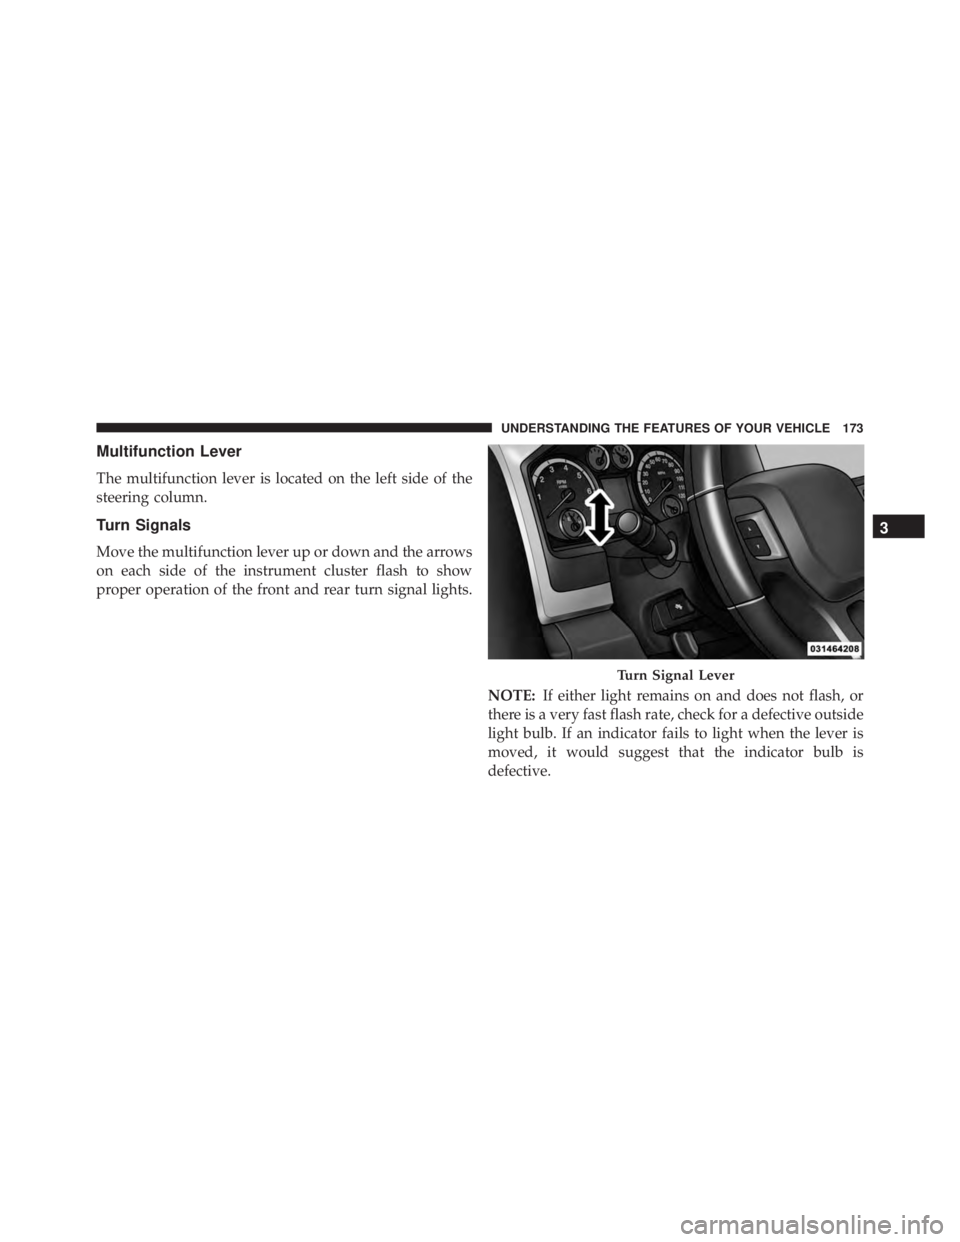 RAM CHASSIS CAB 2016  Owners Manual Multifunction Lever
The multifunction lever is located on the left side of the
steering column.
Turn Signals
Move the multifunction lever up or down and the arrows
on each side of the instrument clust